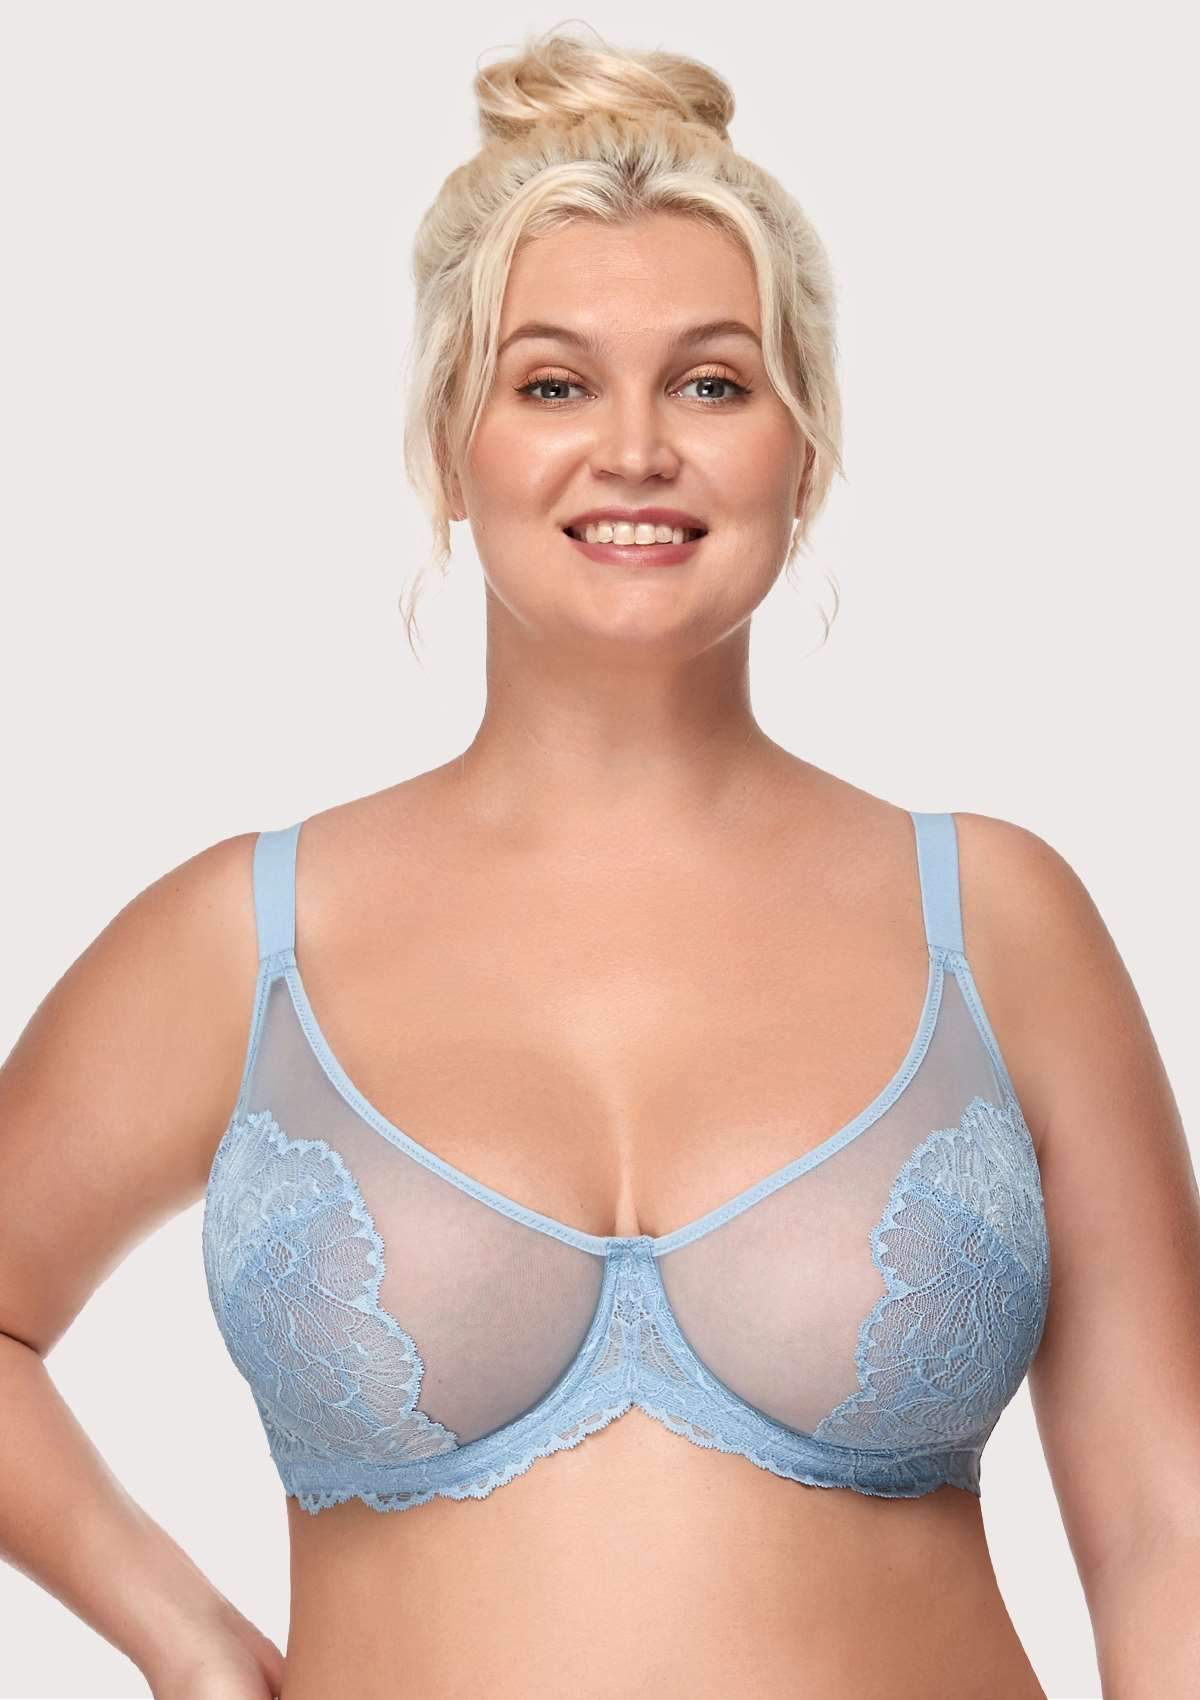 HSIA Blossom Full Coverage Supportive Unlined Underwire Bra Set - Storm Blue / 40 / D